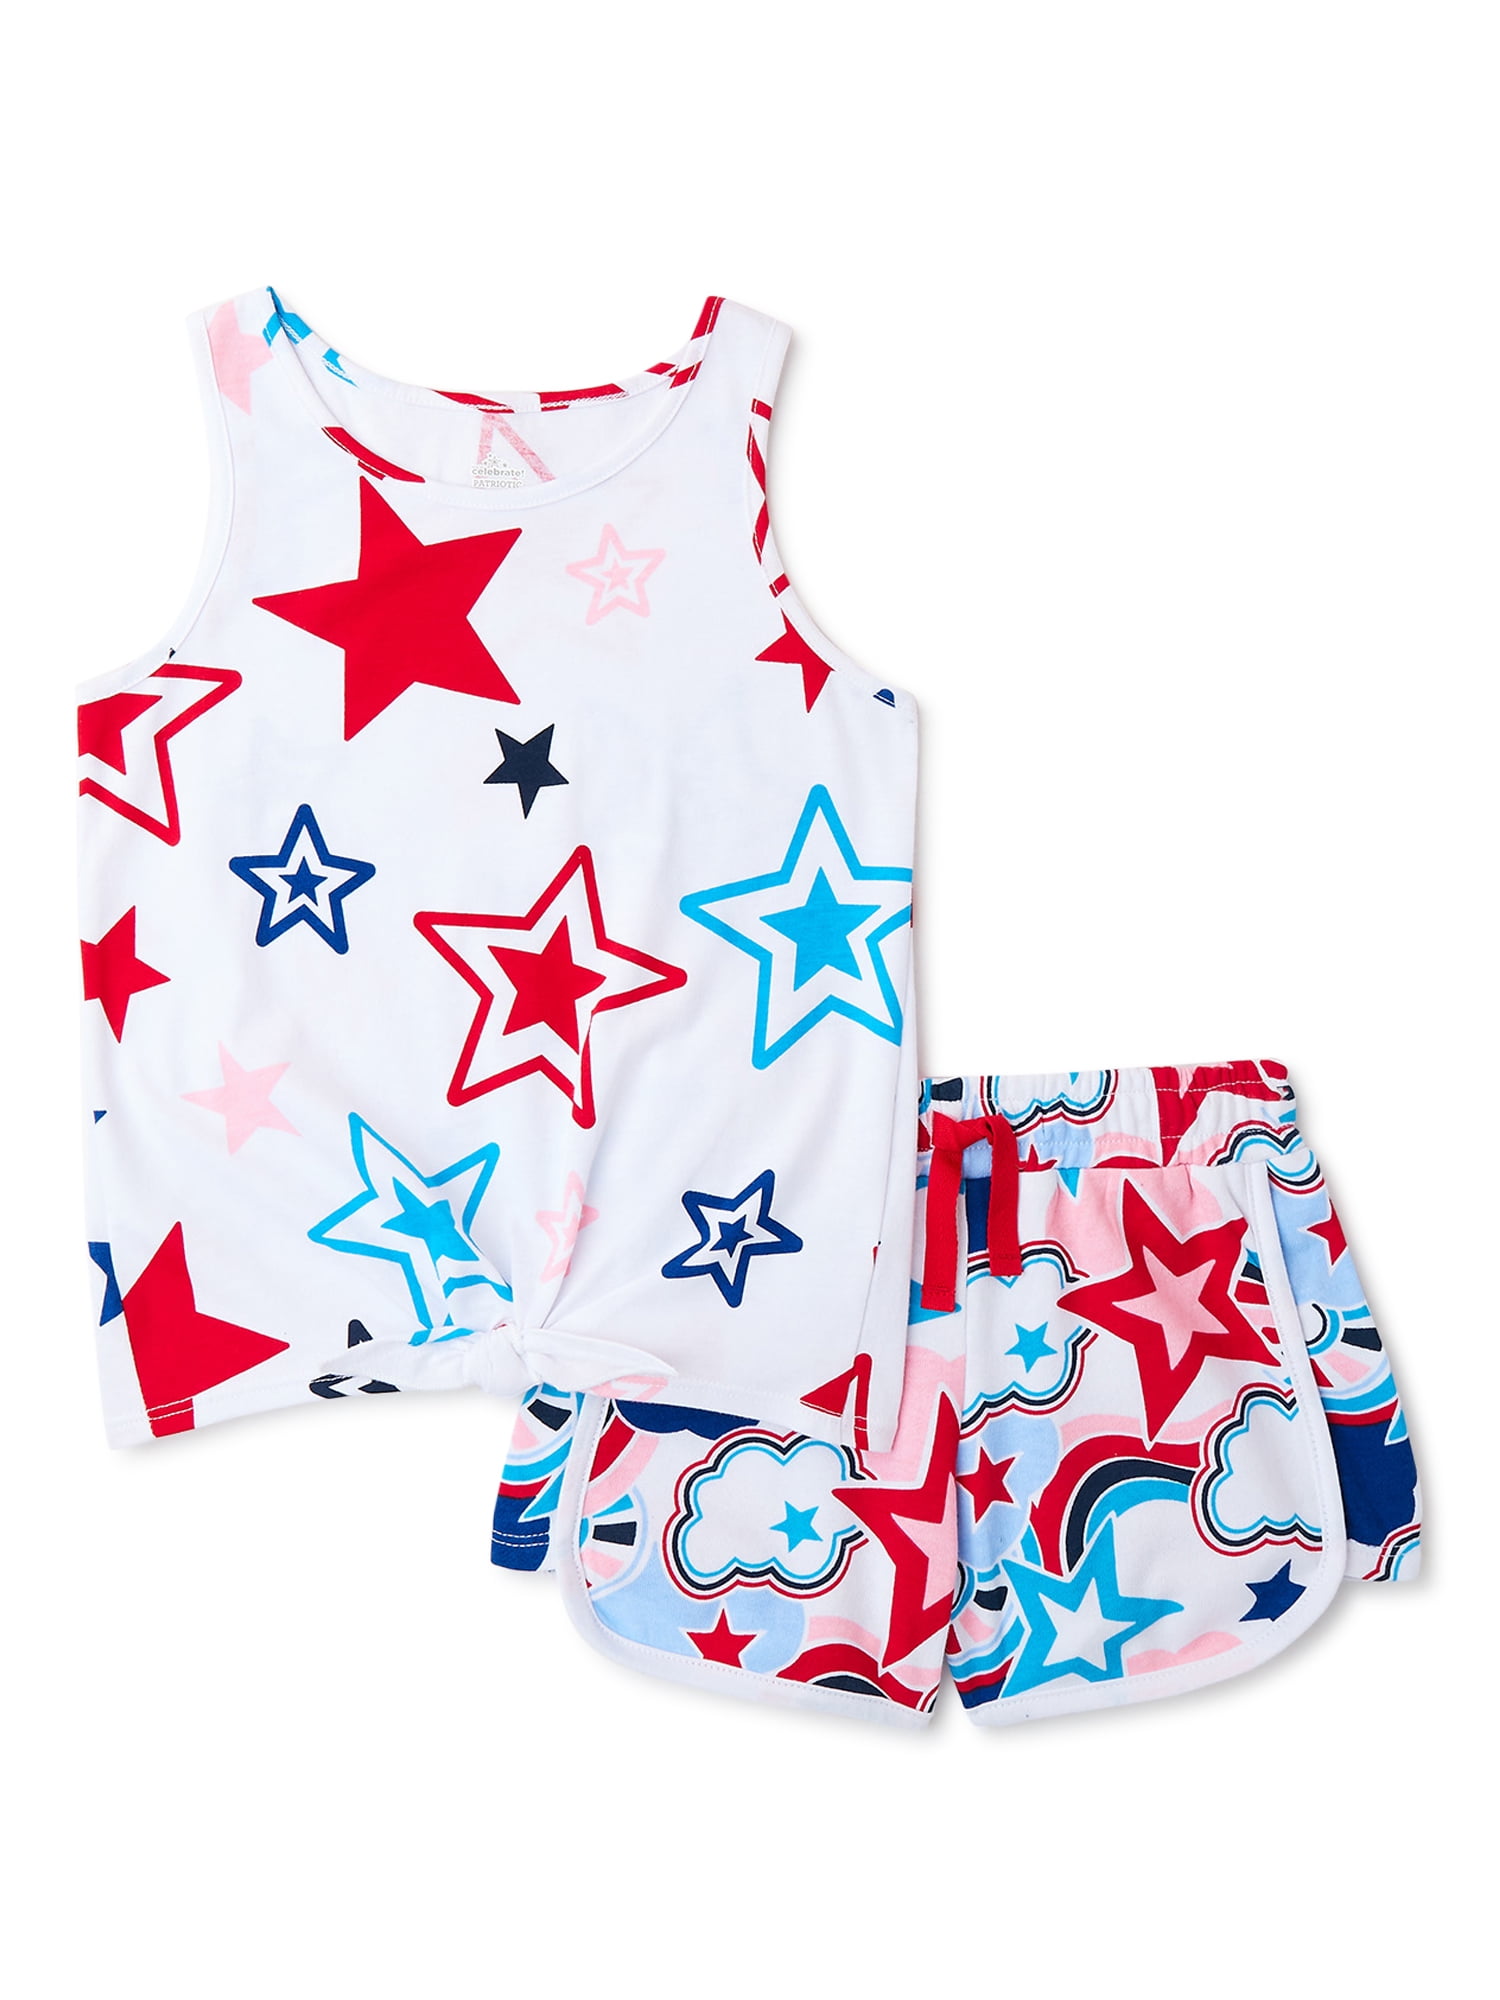 Girls’ Americana Star Print Tank Top and Shorts, 2-Piece Outfit Set ...